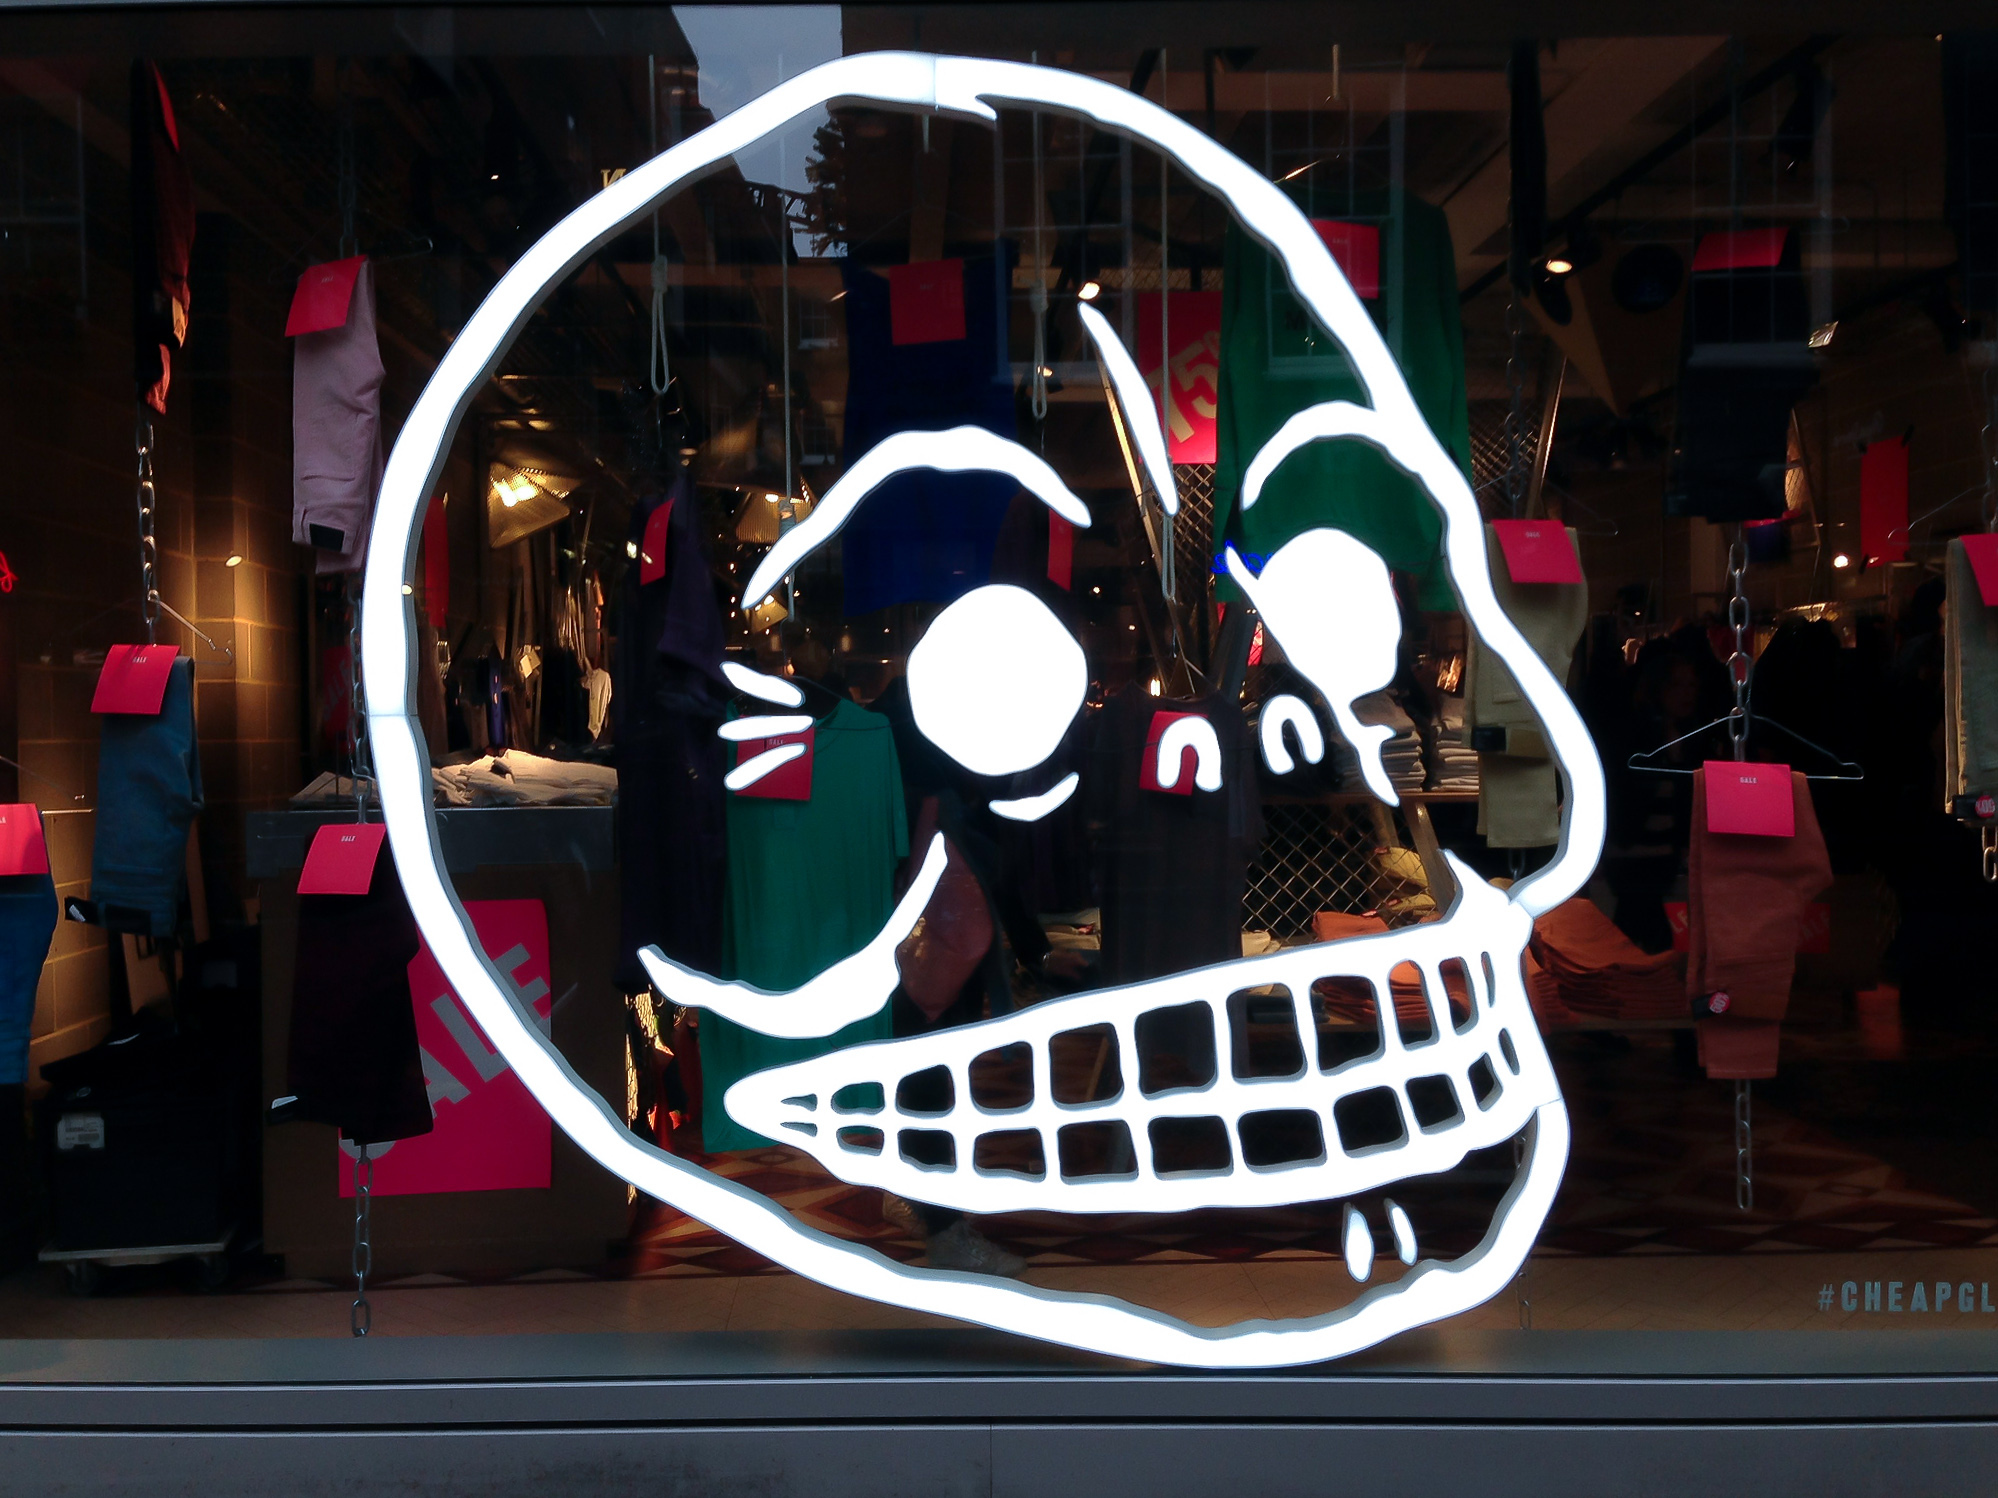 Cheap Monday window in London. Photo by alphacityguides.